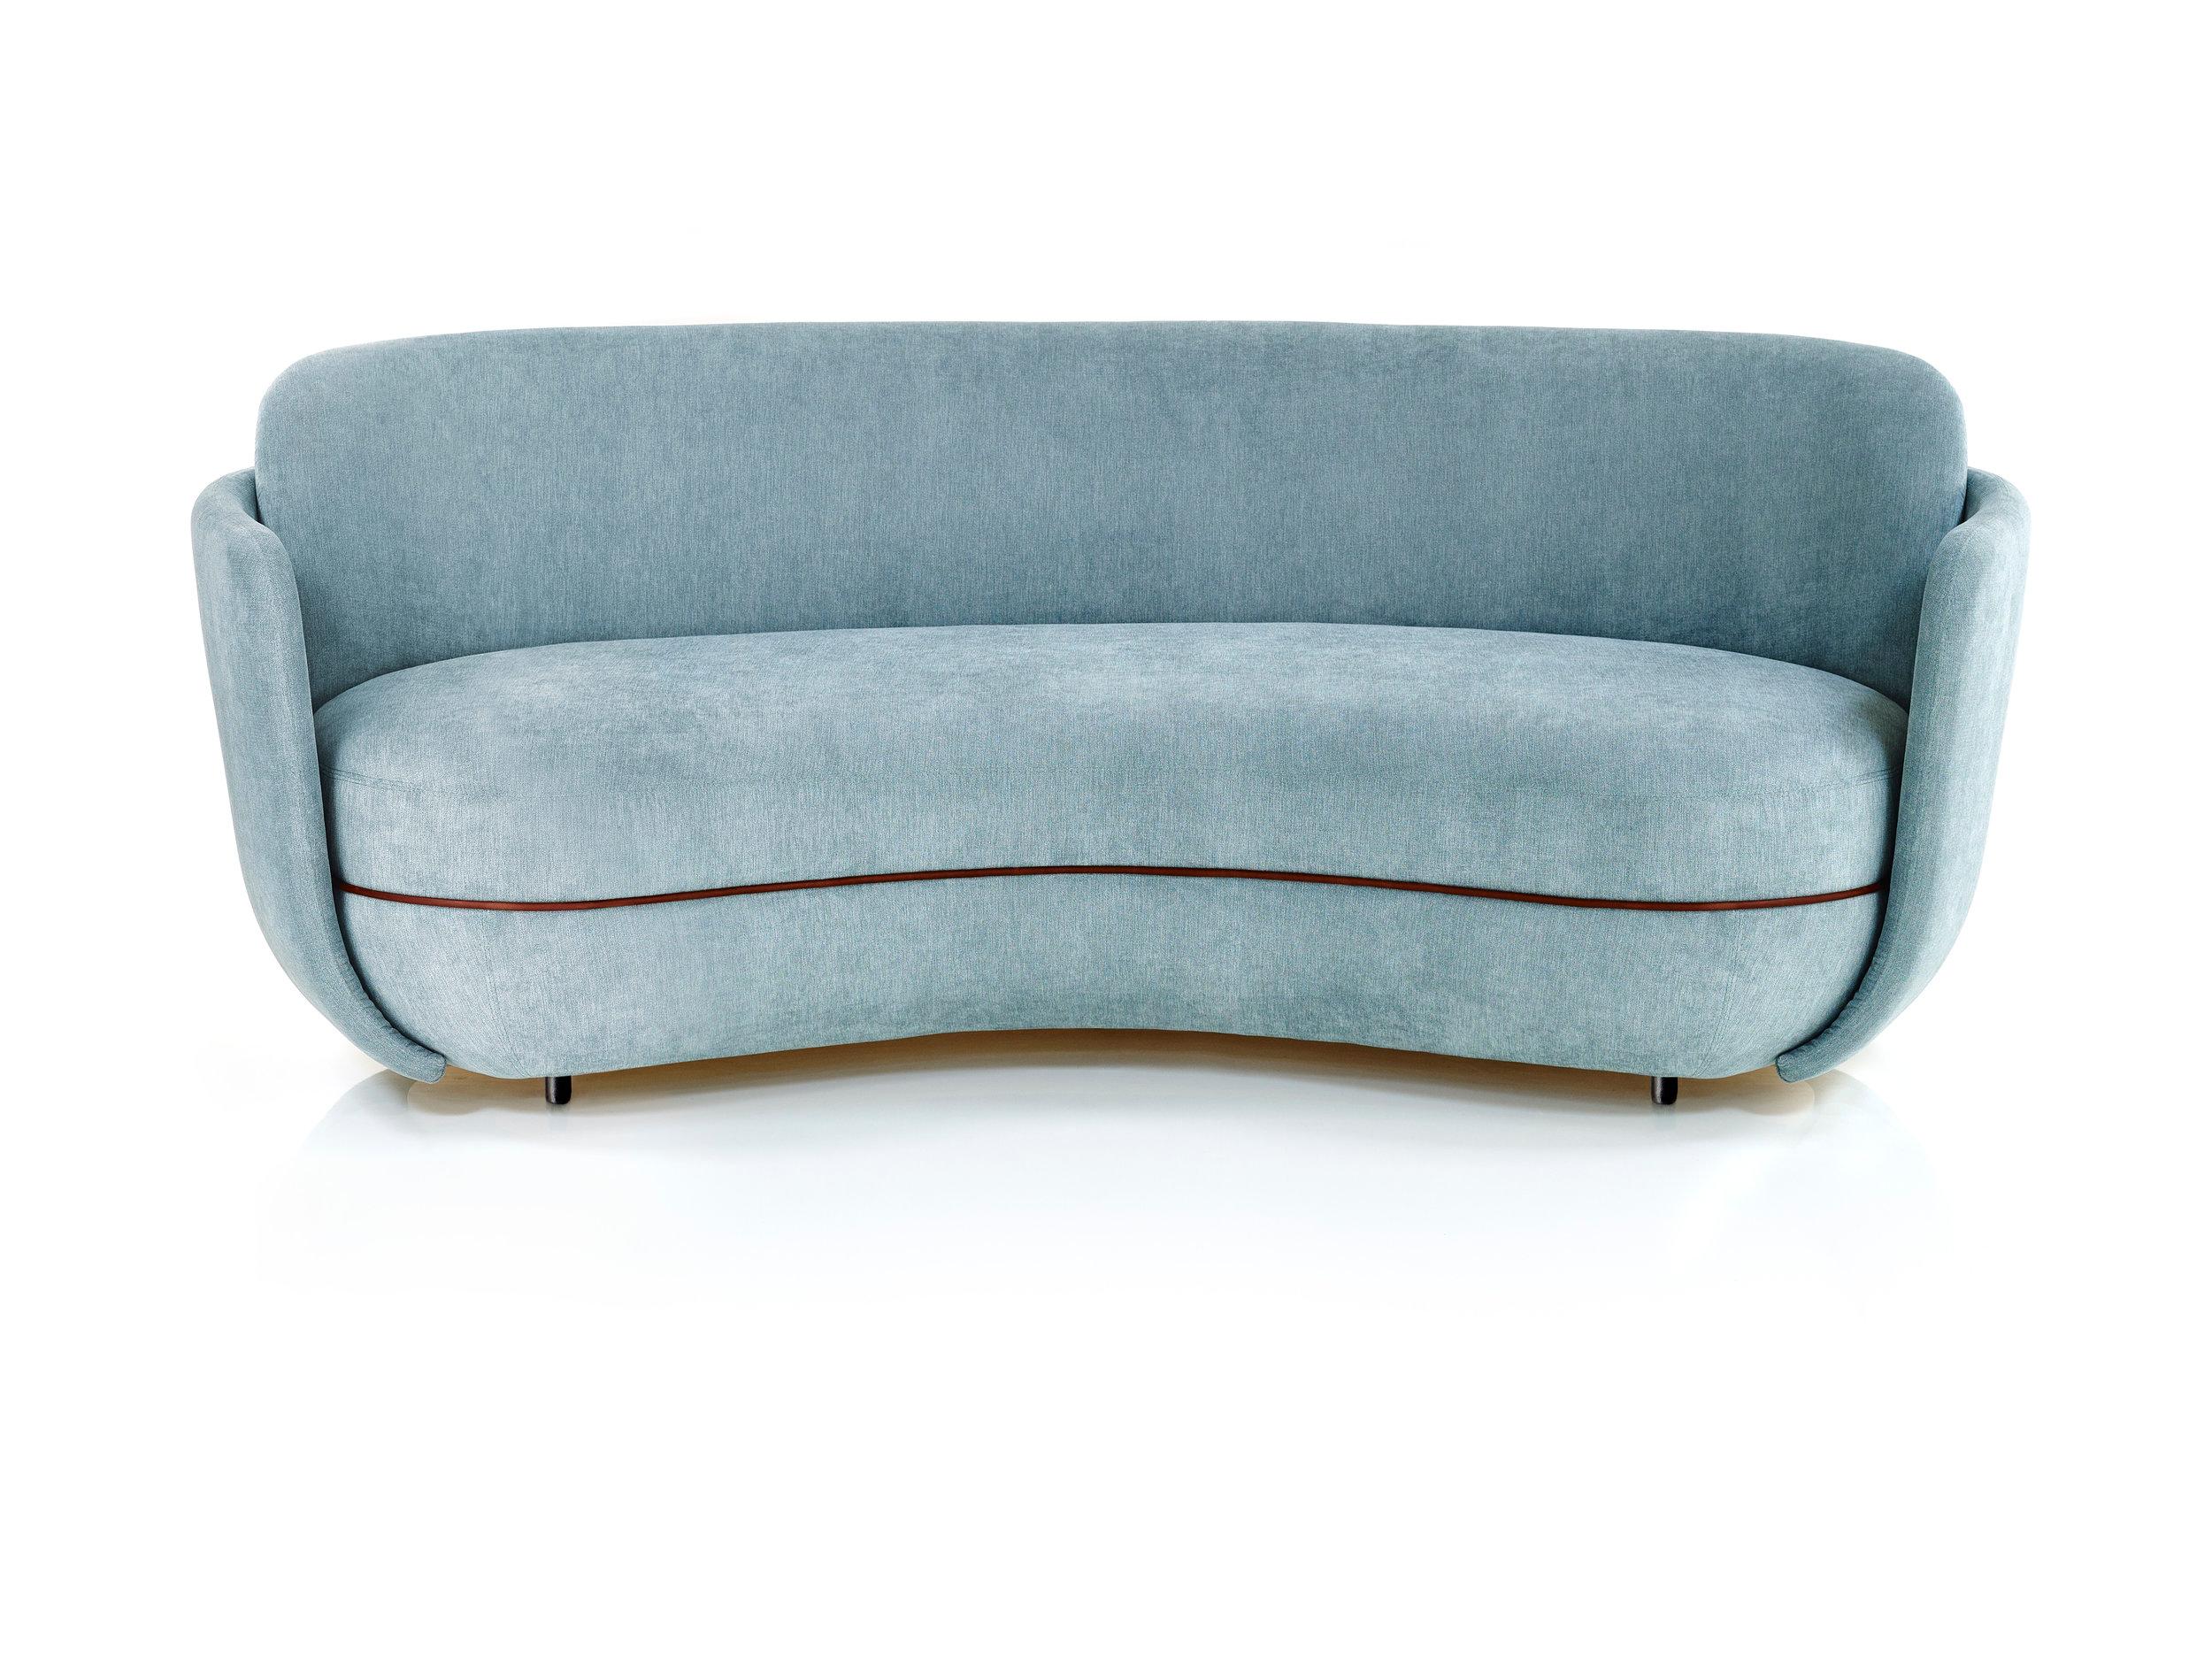 Many different upholstery materials available.
Soft, round, inviting, protective. Many attributes can be ascribed to the chairs, armchairs, sofas and tables in the Miles series. They add refinement to homes, hotel lounge areas, meeting corners in